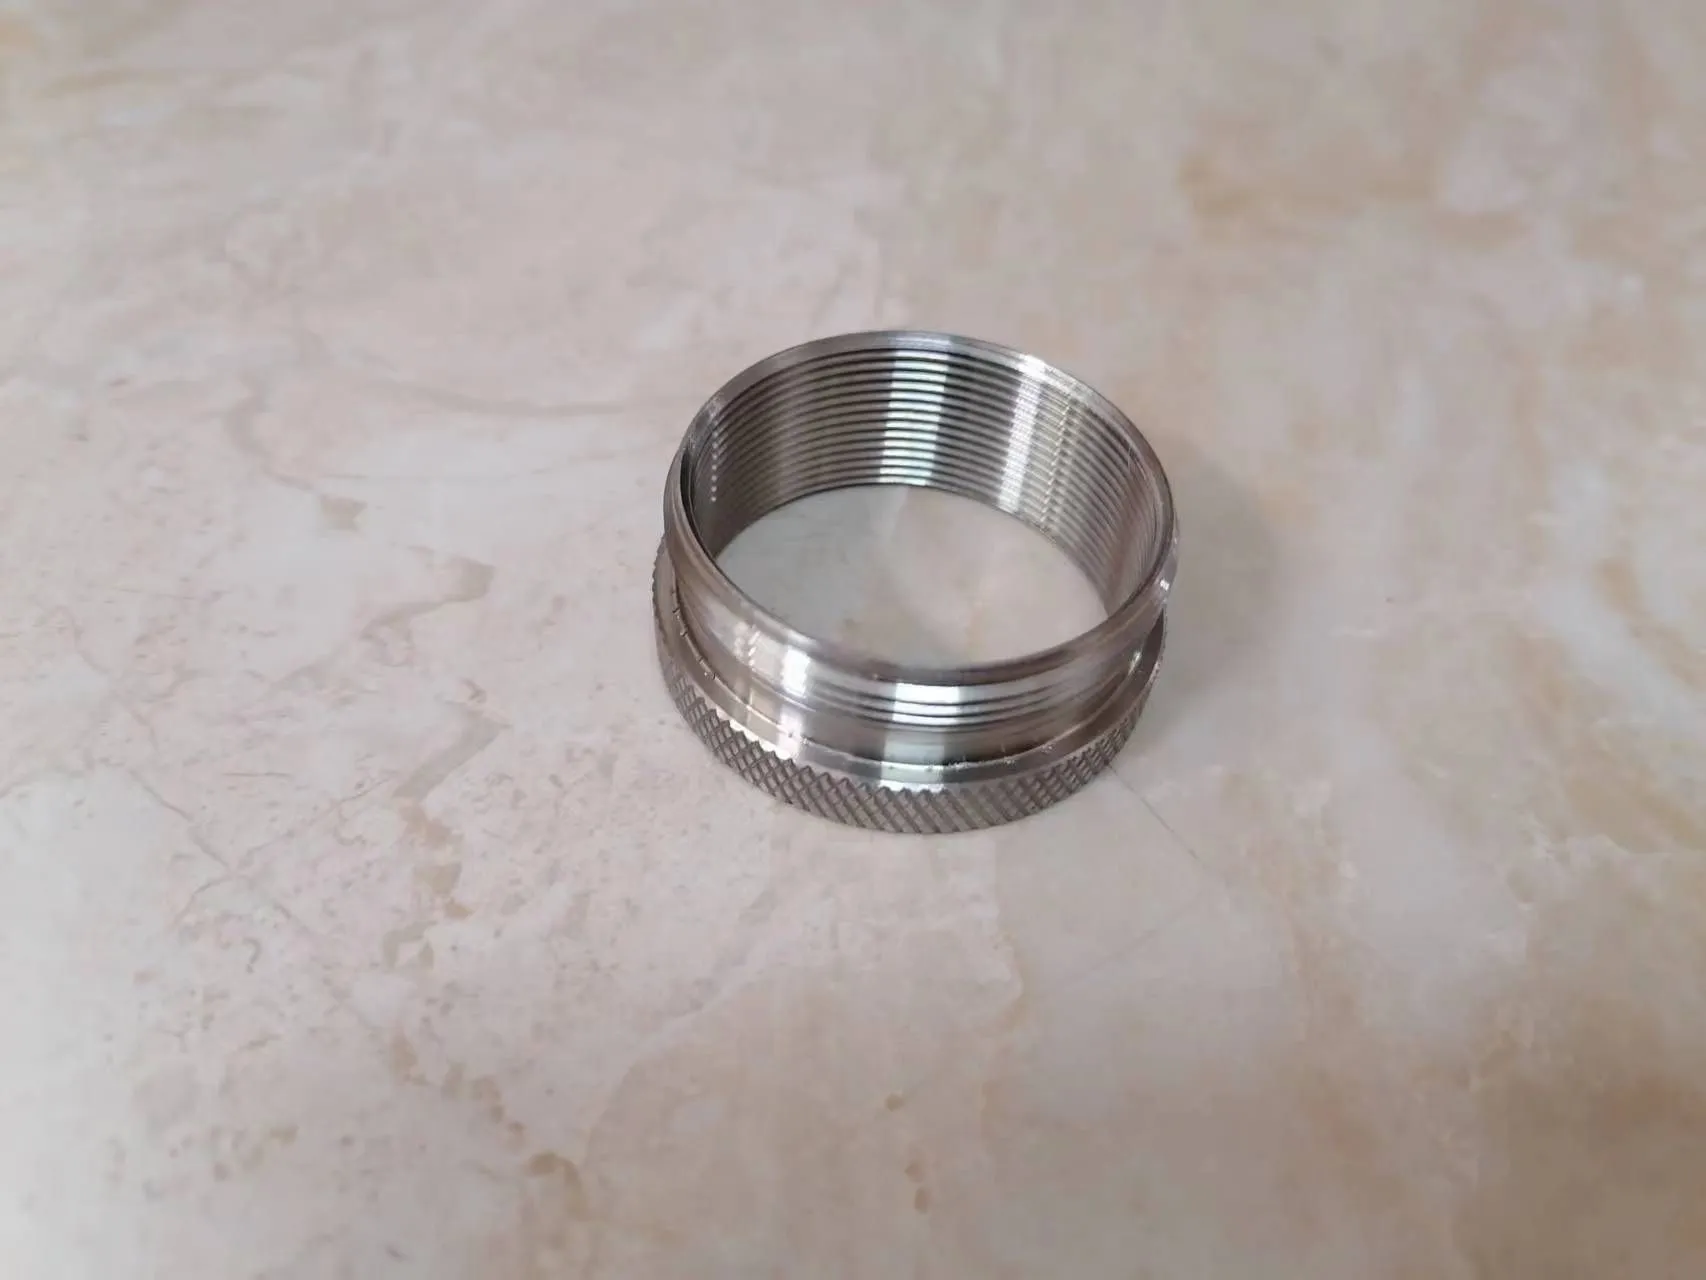 Stainless Steel 1.375*24 Thread Adapter for 6.2 inch Titanium Solvent Trap